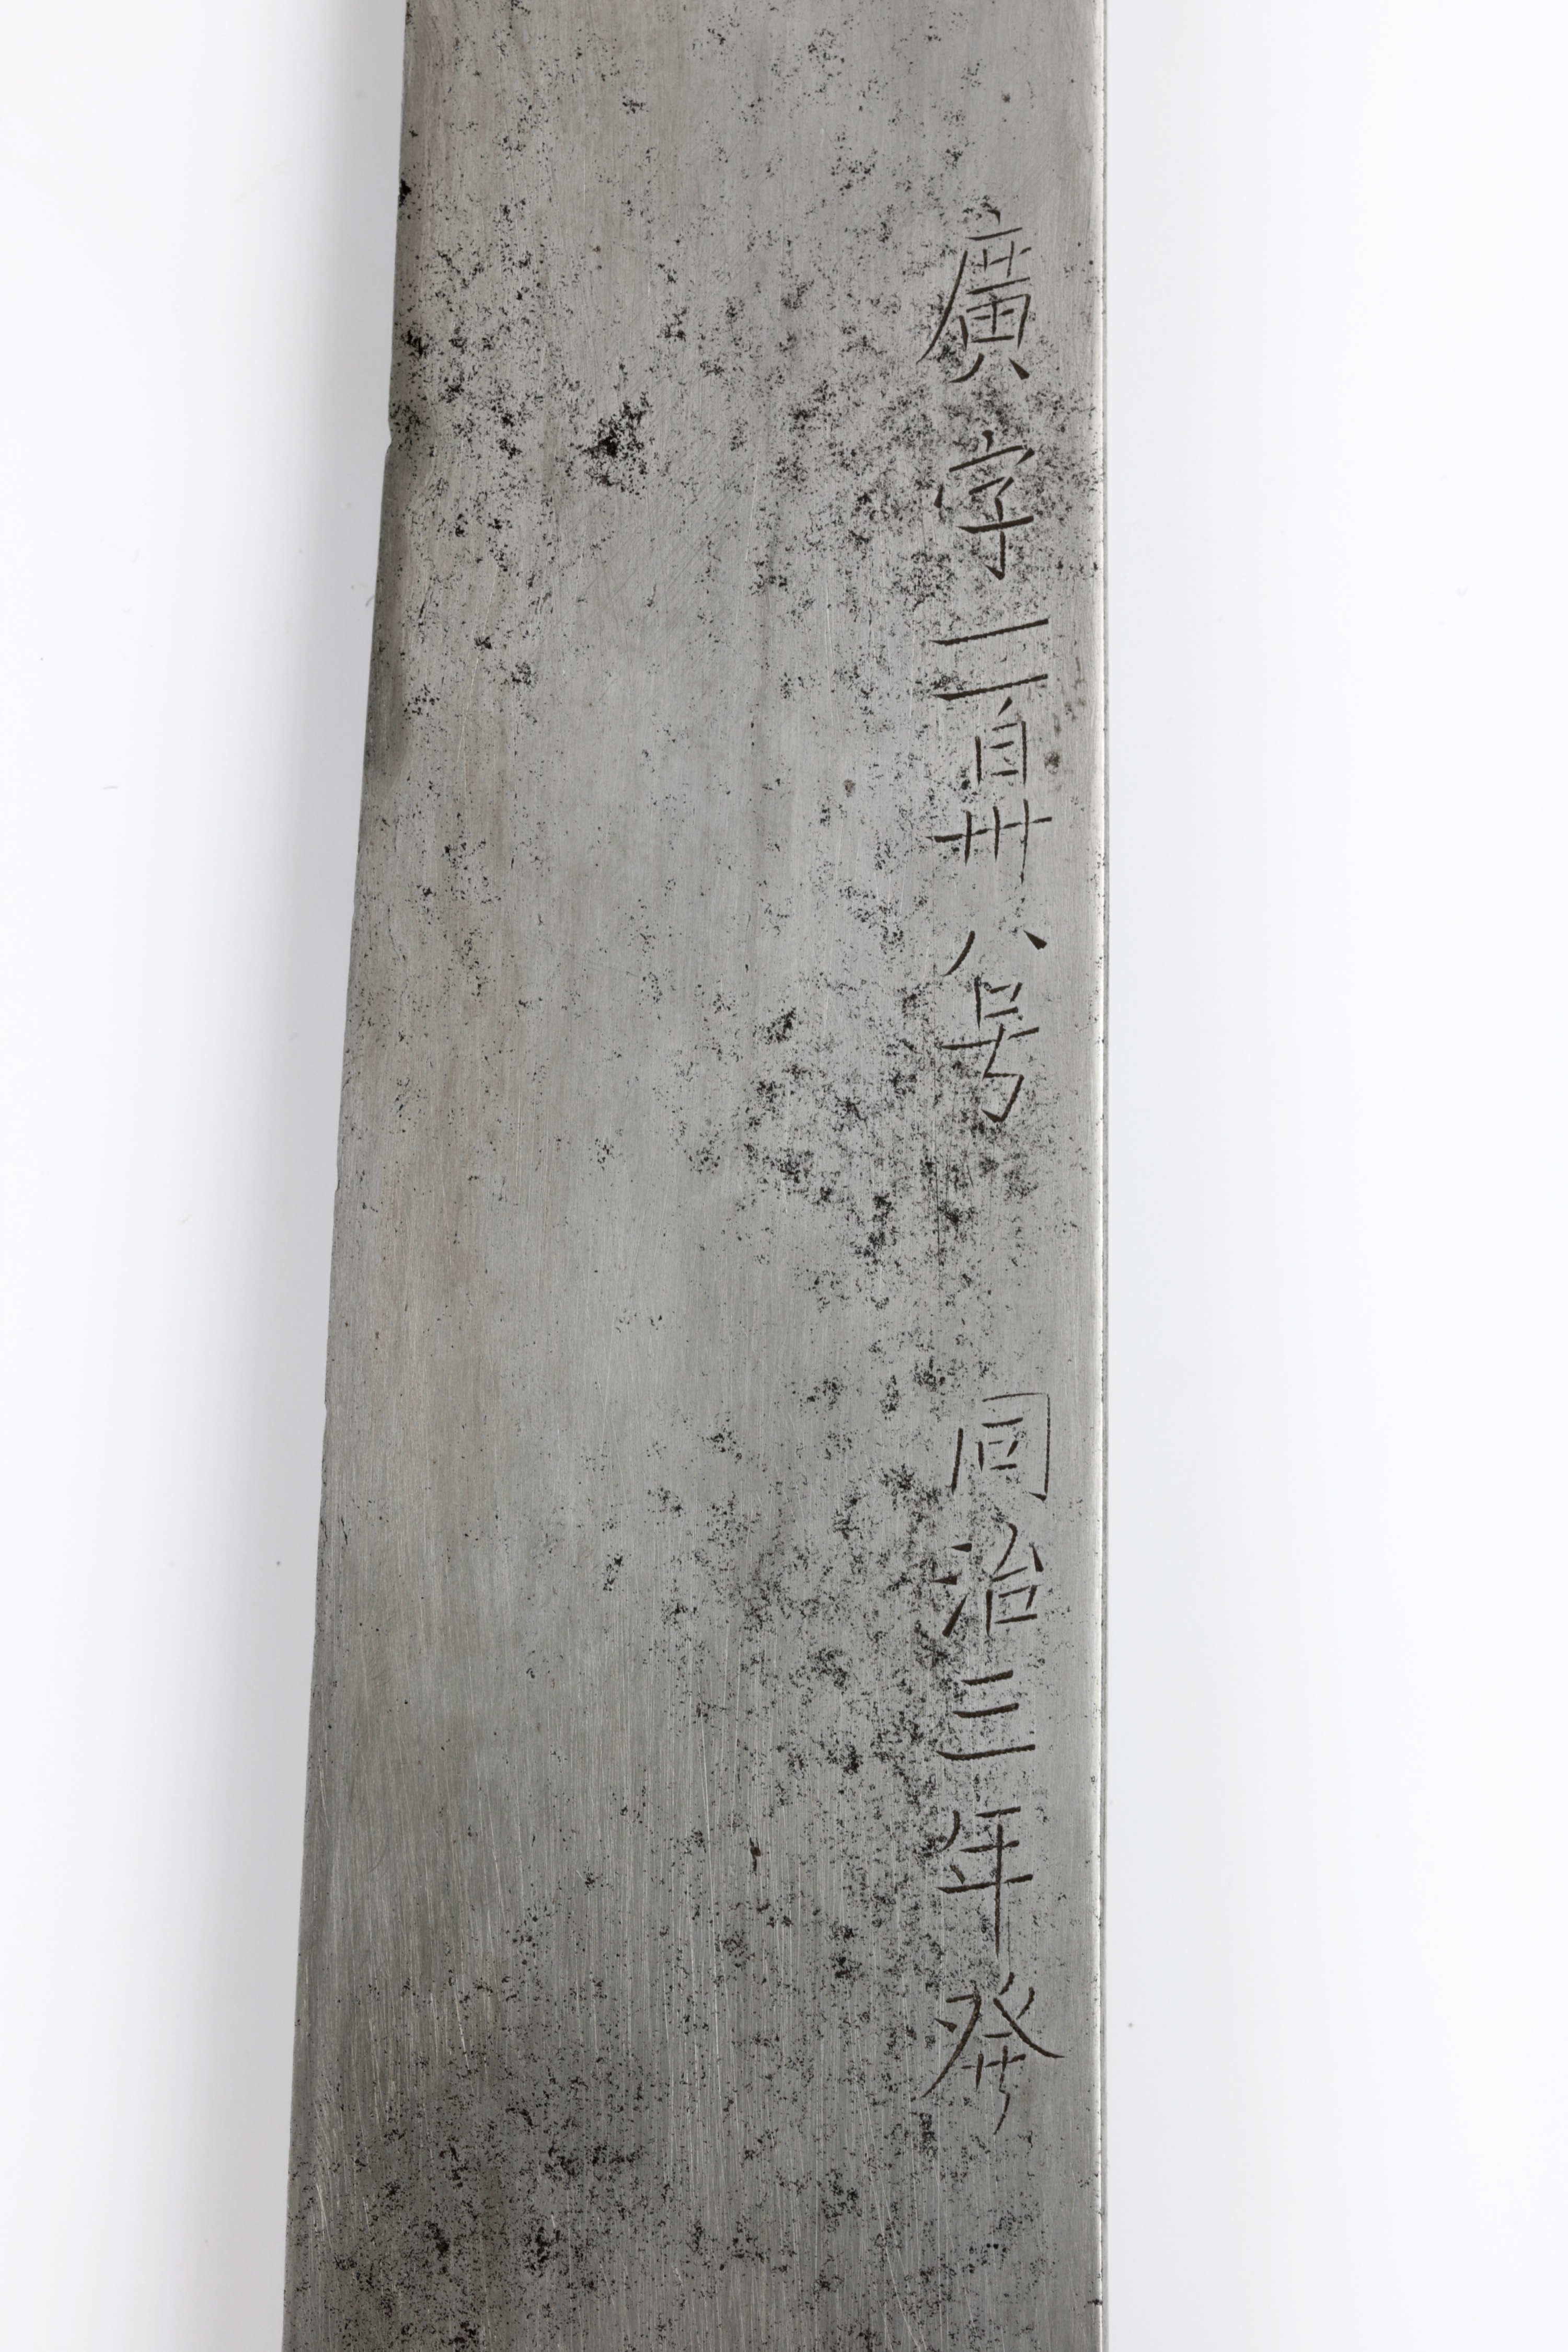 Marking on a Chinese shield sword